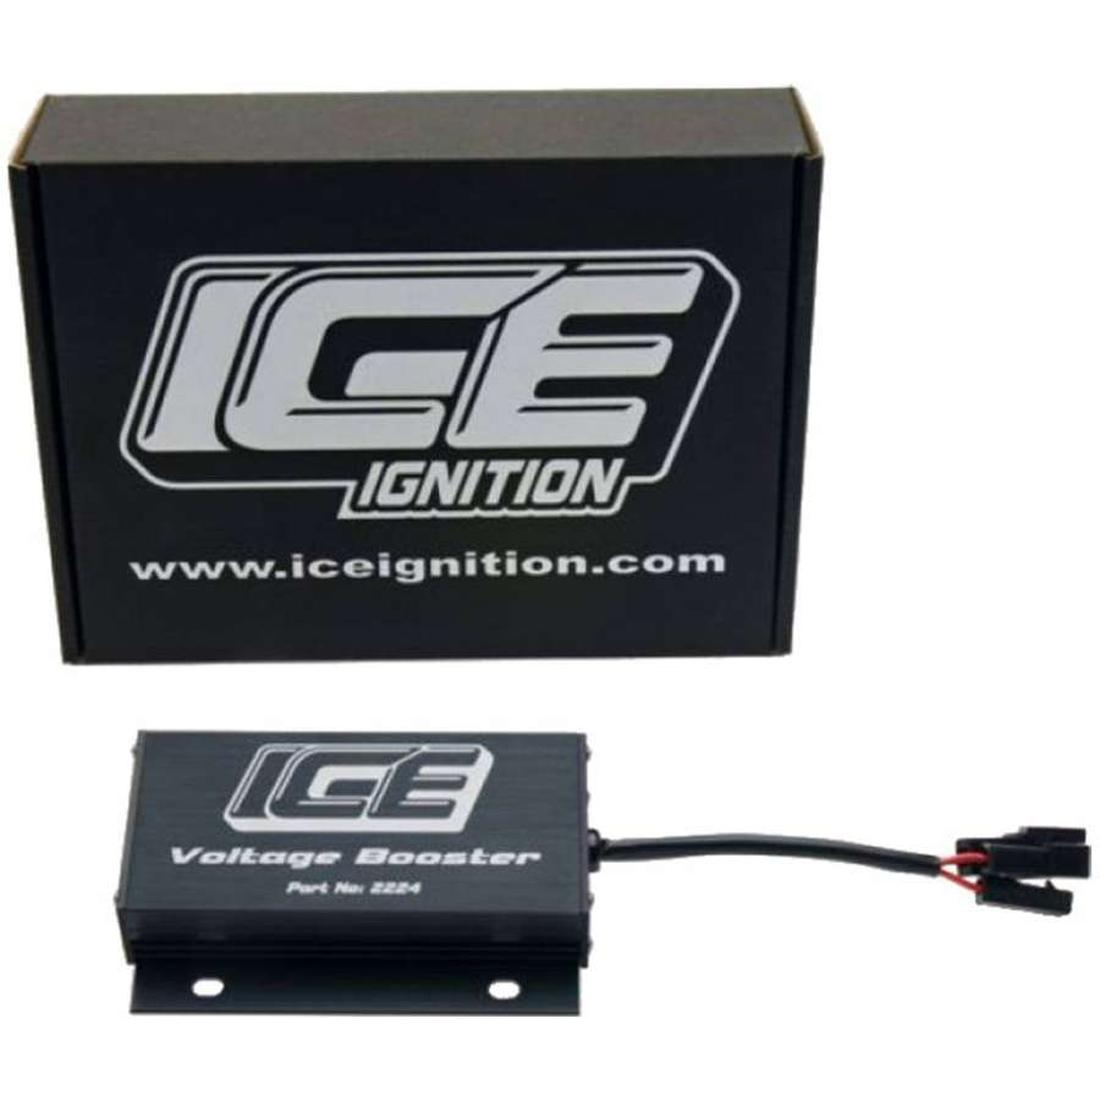 ICE Ignition 16V Voltage Booster (CDI Single Coil Systems) image